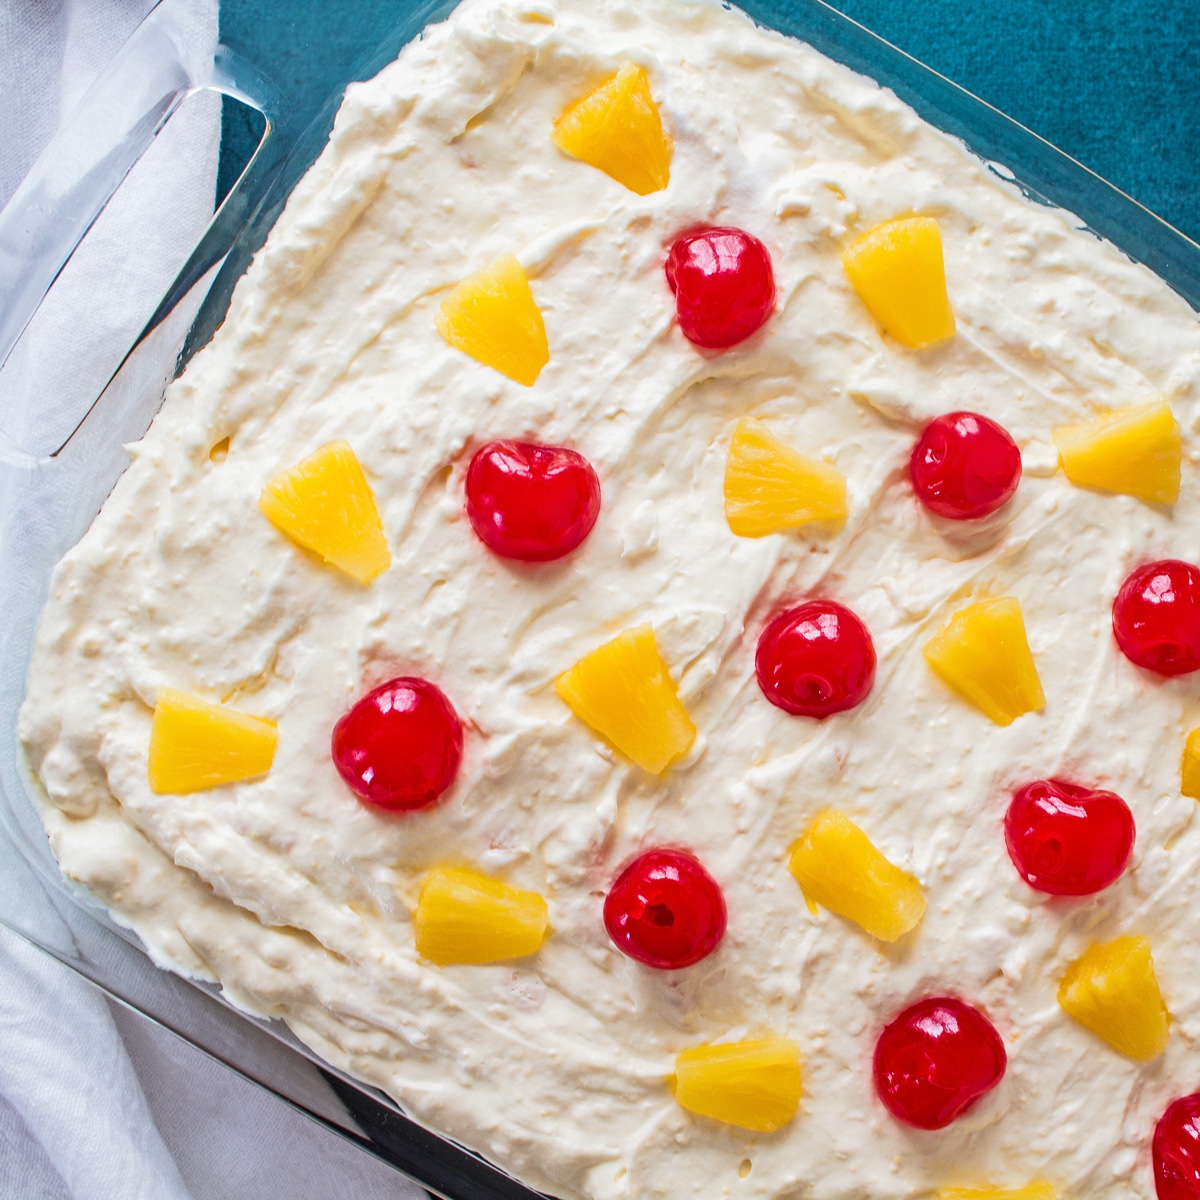 square image showing an overhead of the assembled pineapple sunshine cake in the 9 x 13 pan with green background and garnished with pineapple chunks and maraschino cherries